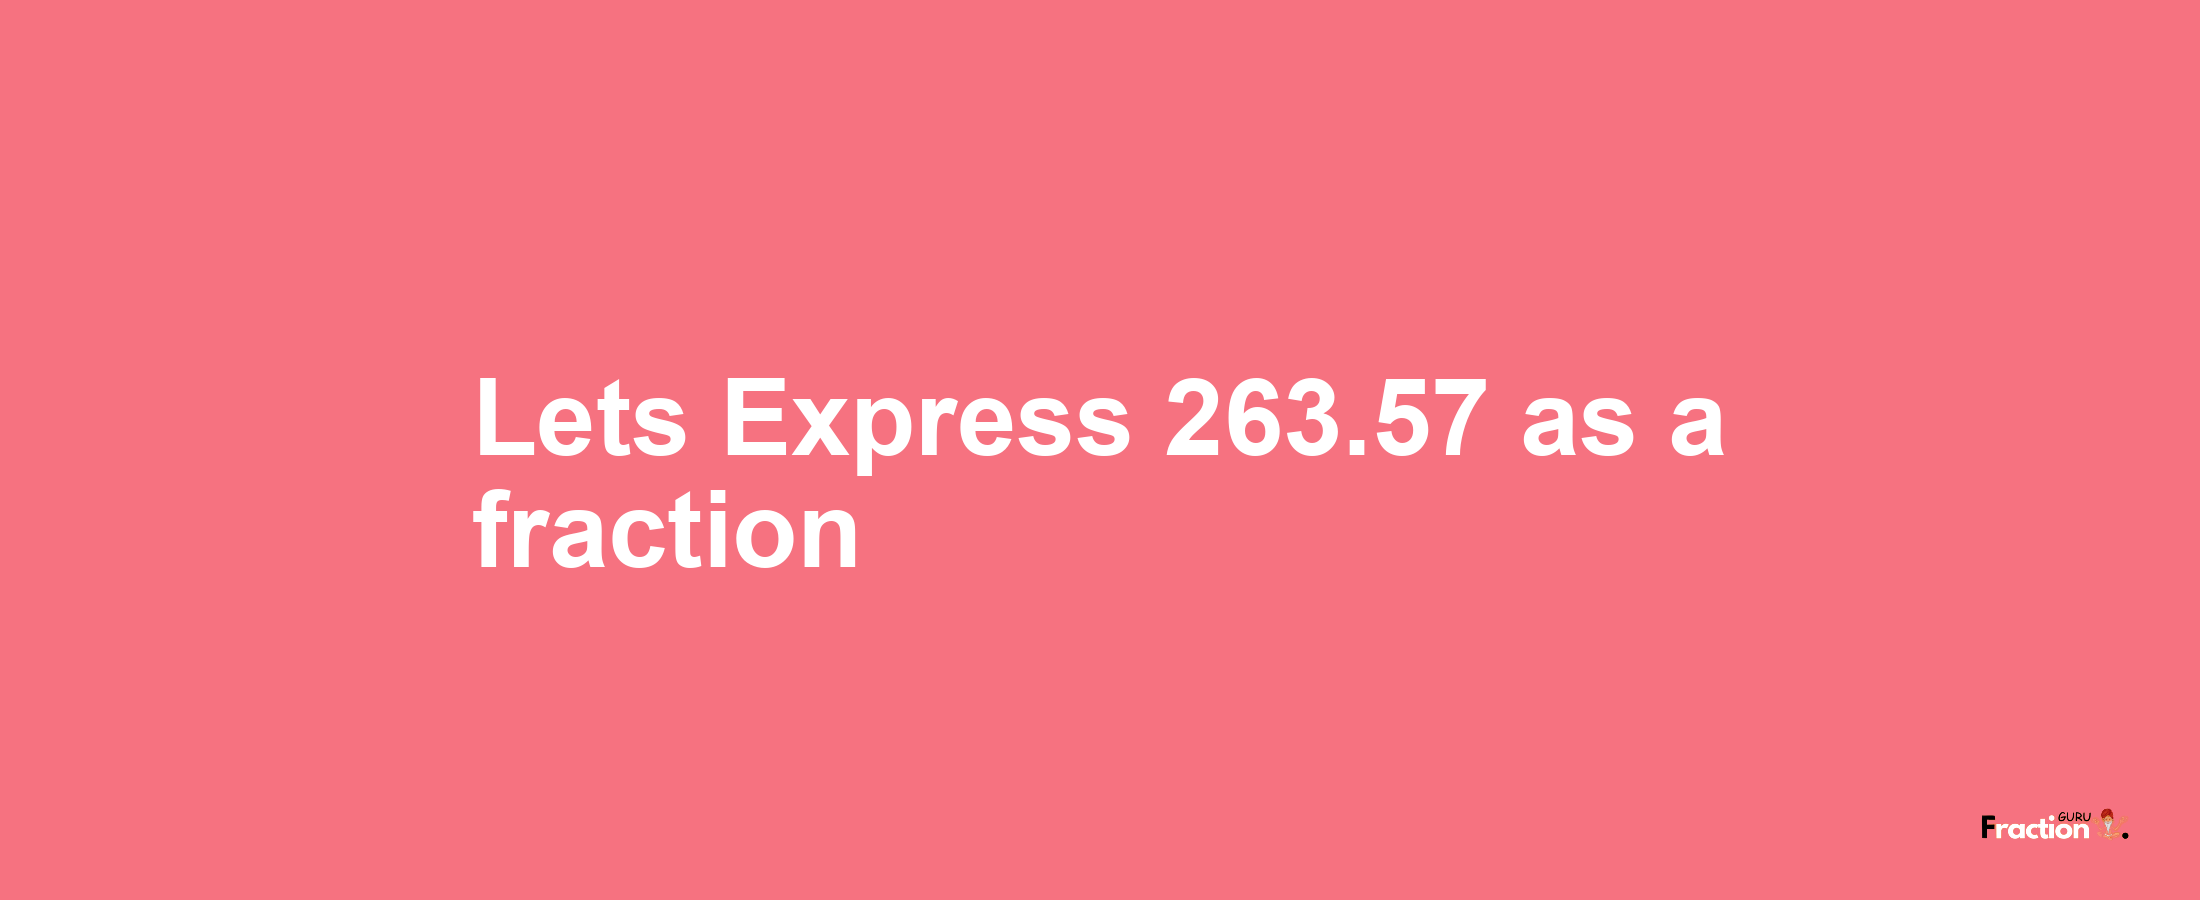 Lets Express 263.57 as afraction